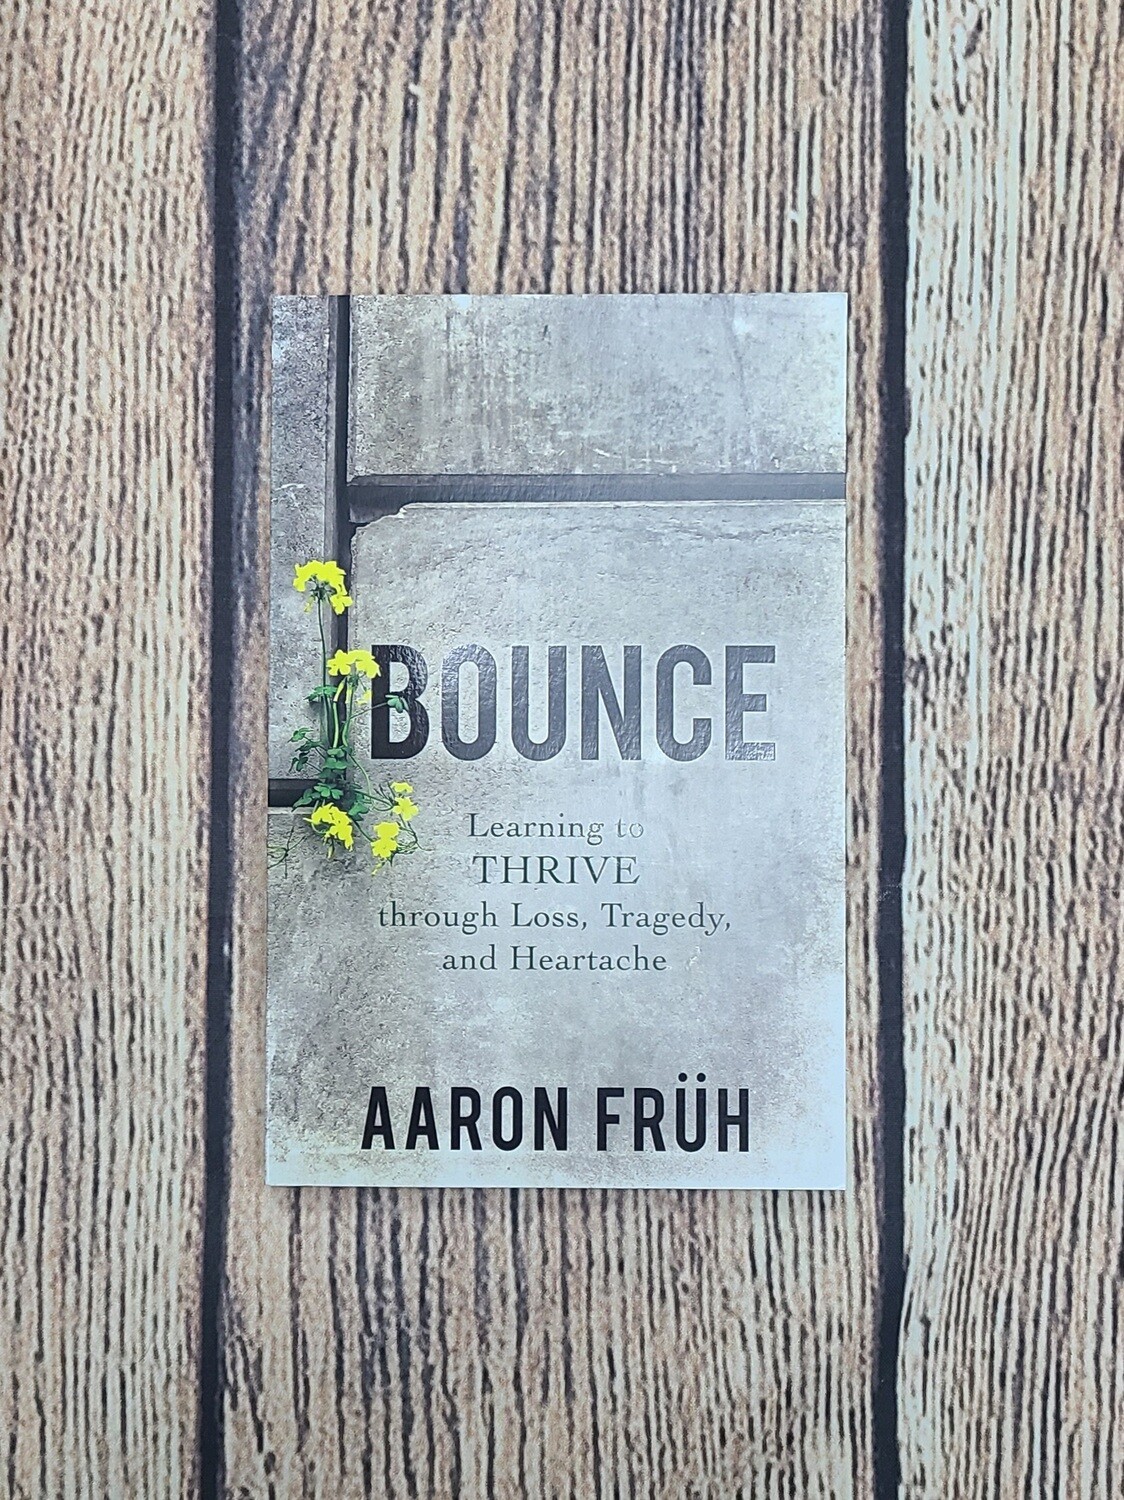 Bounce by Aaron Fruh